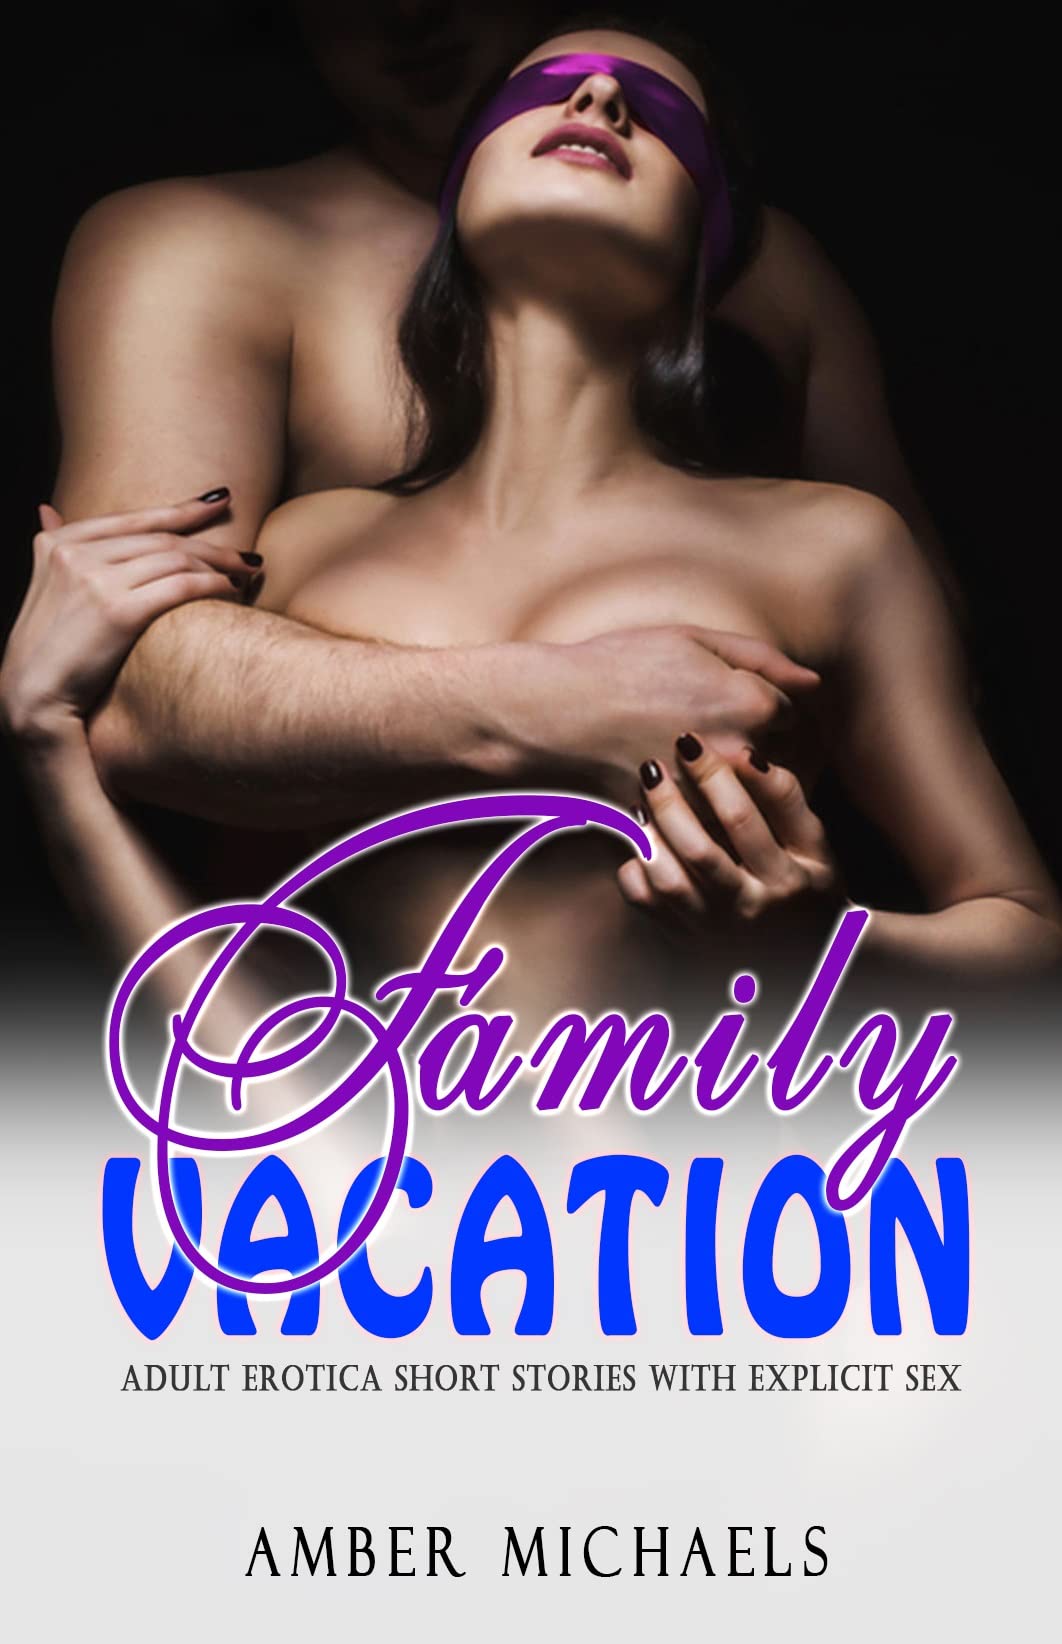 anne berard recommends nude family vacation stories pic